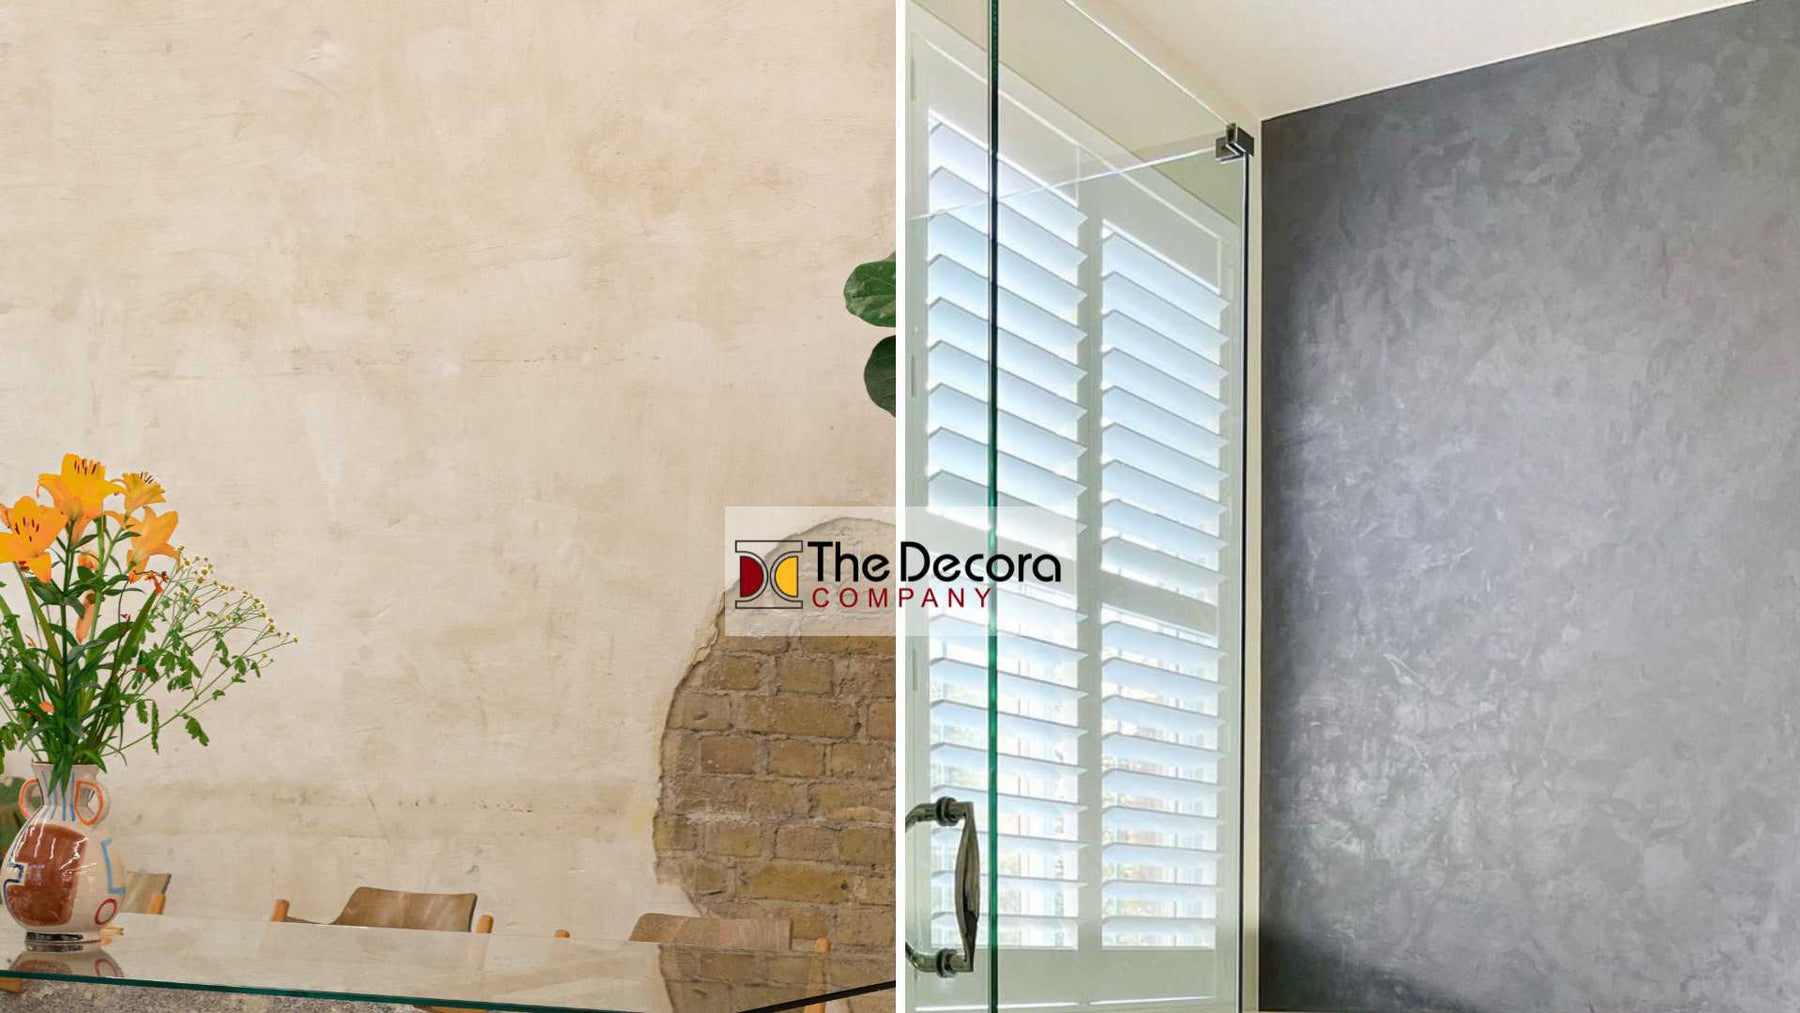 Advantage of Having a Decorative Plastered Wall to Your Home The Decora Company